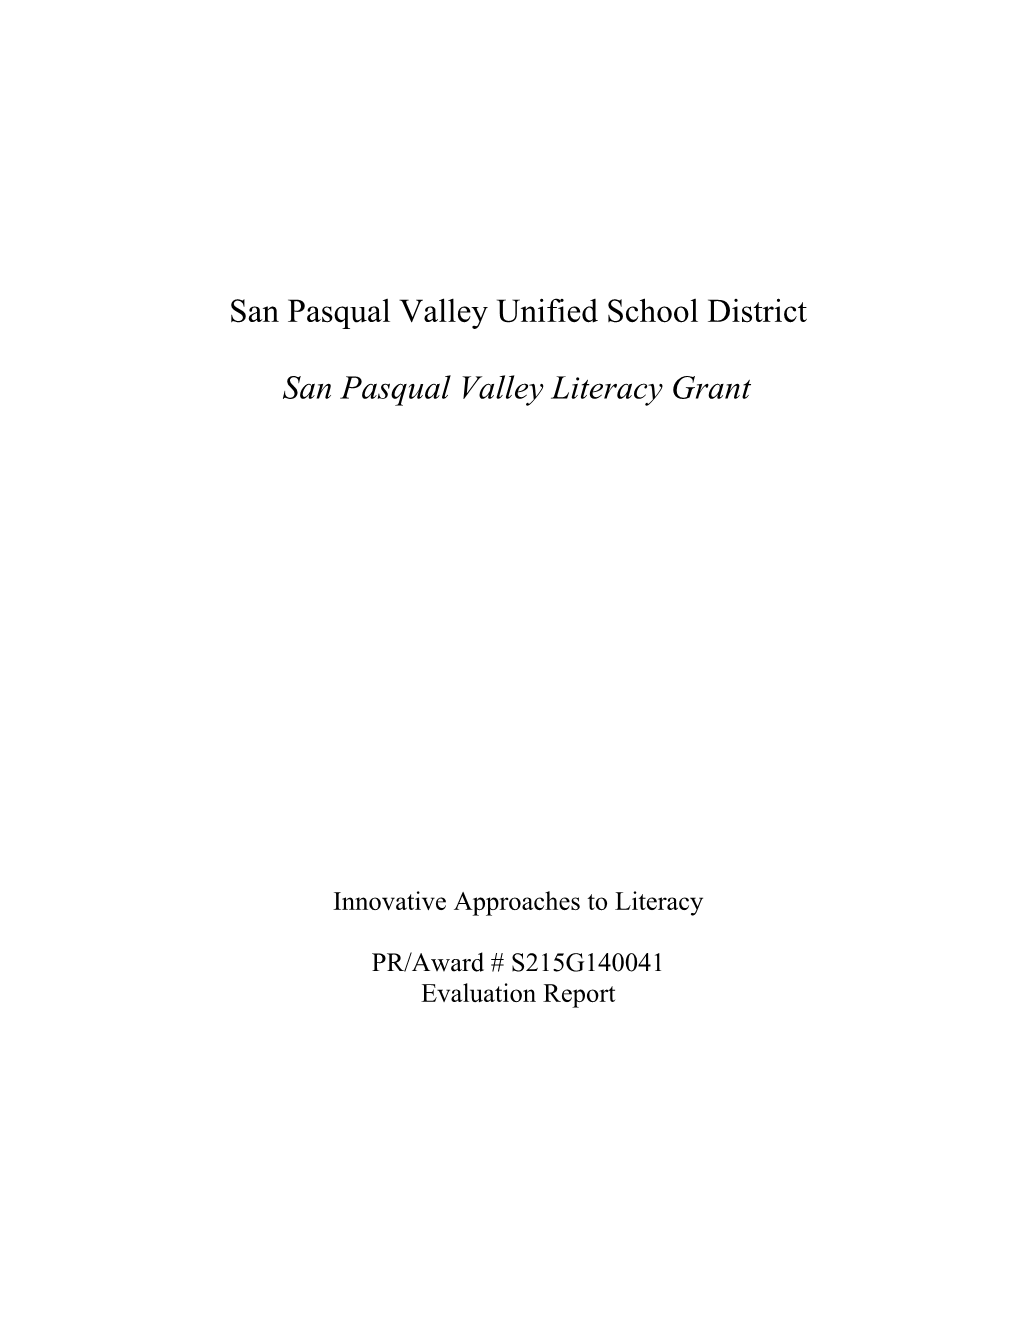 San Pasqual Valley Unified School District Evaluation Report (MS Word)